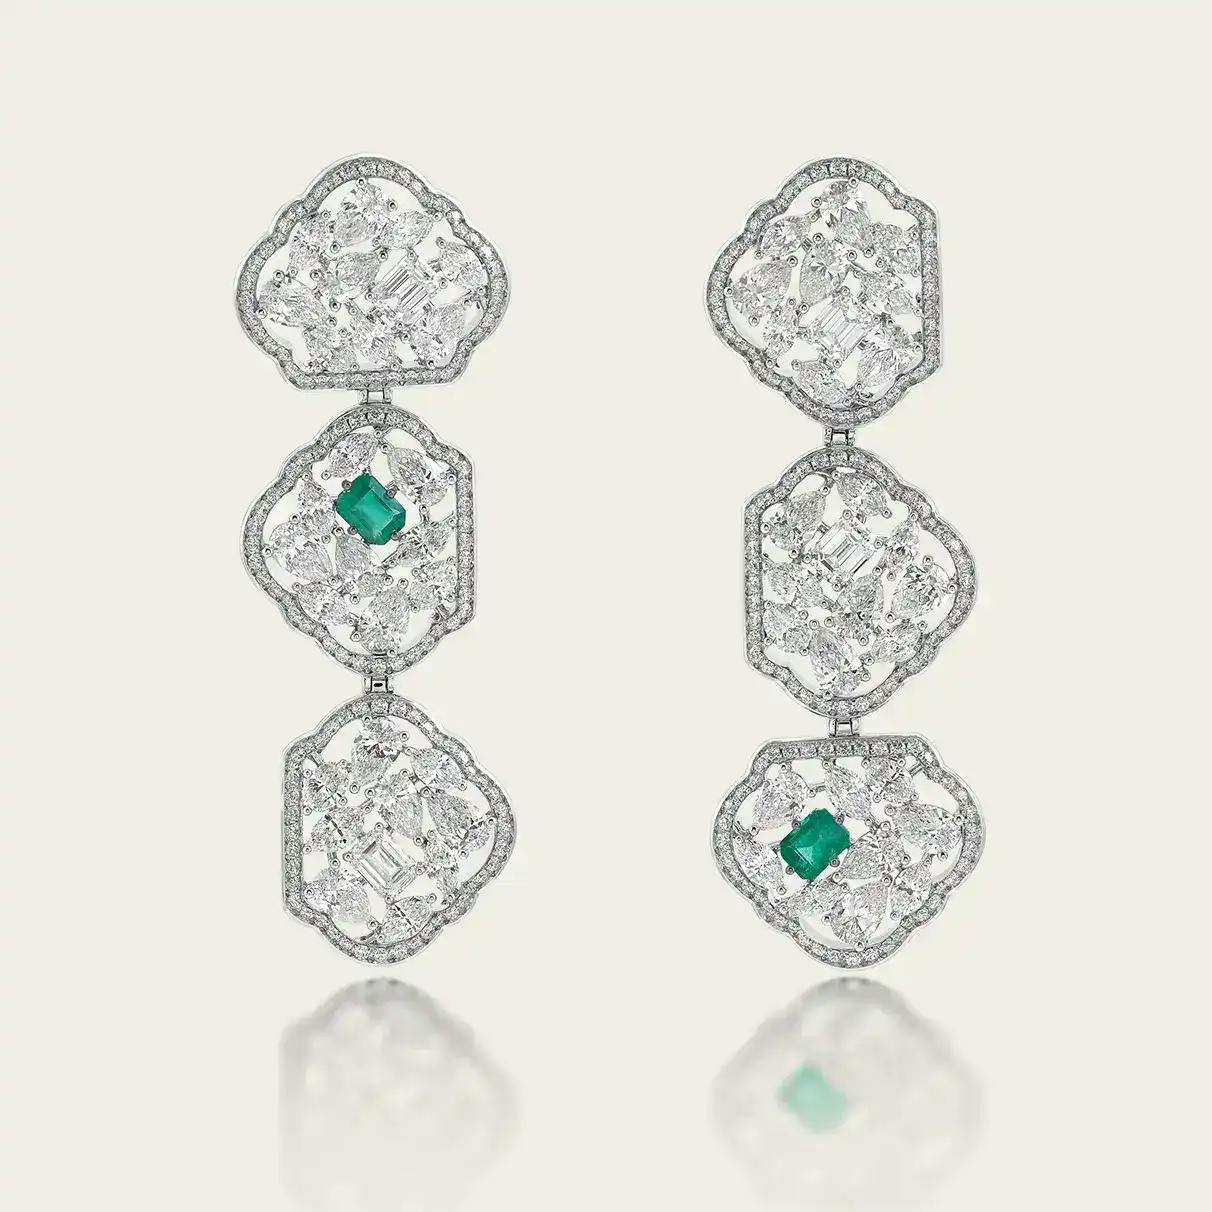 18K recycled white gold earrings with marquise, oval, round, pear and princess-cut white diamonds, Zambian emeralds.